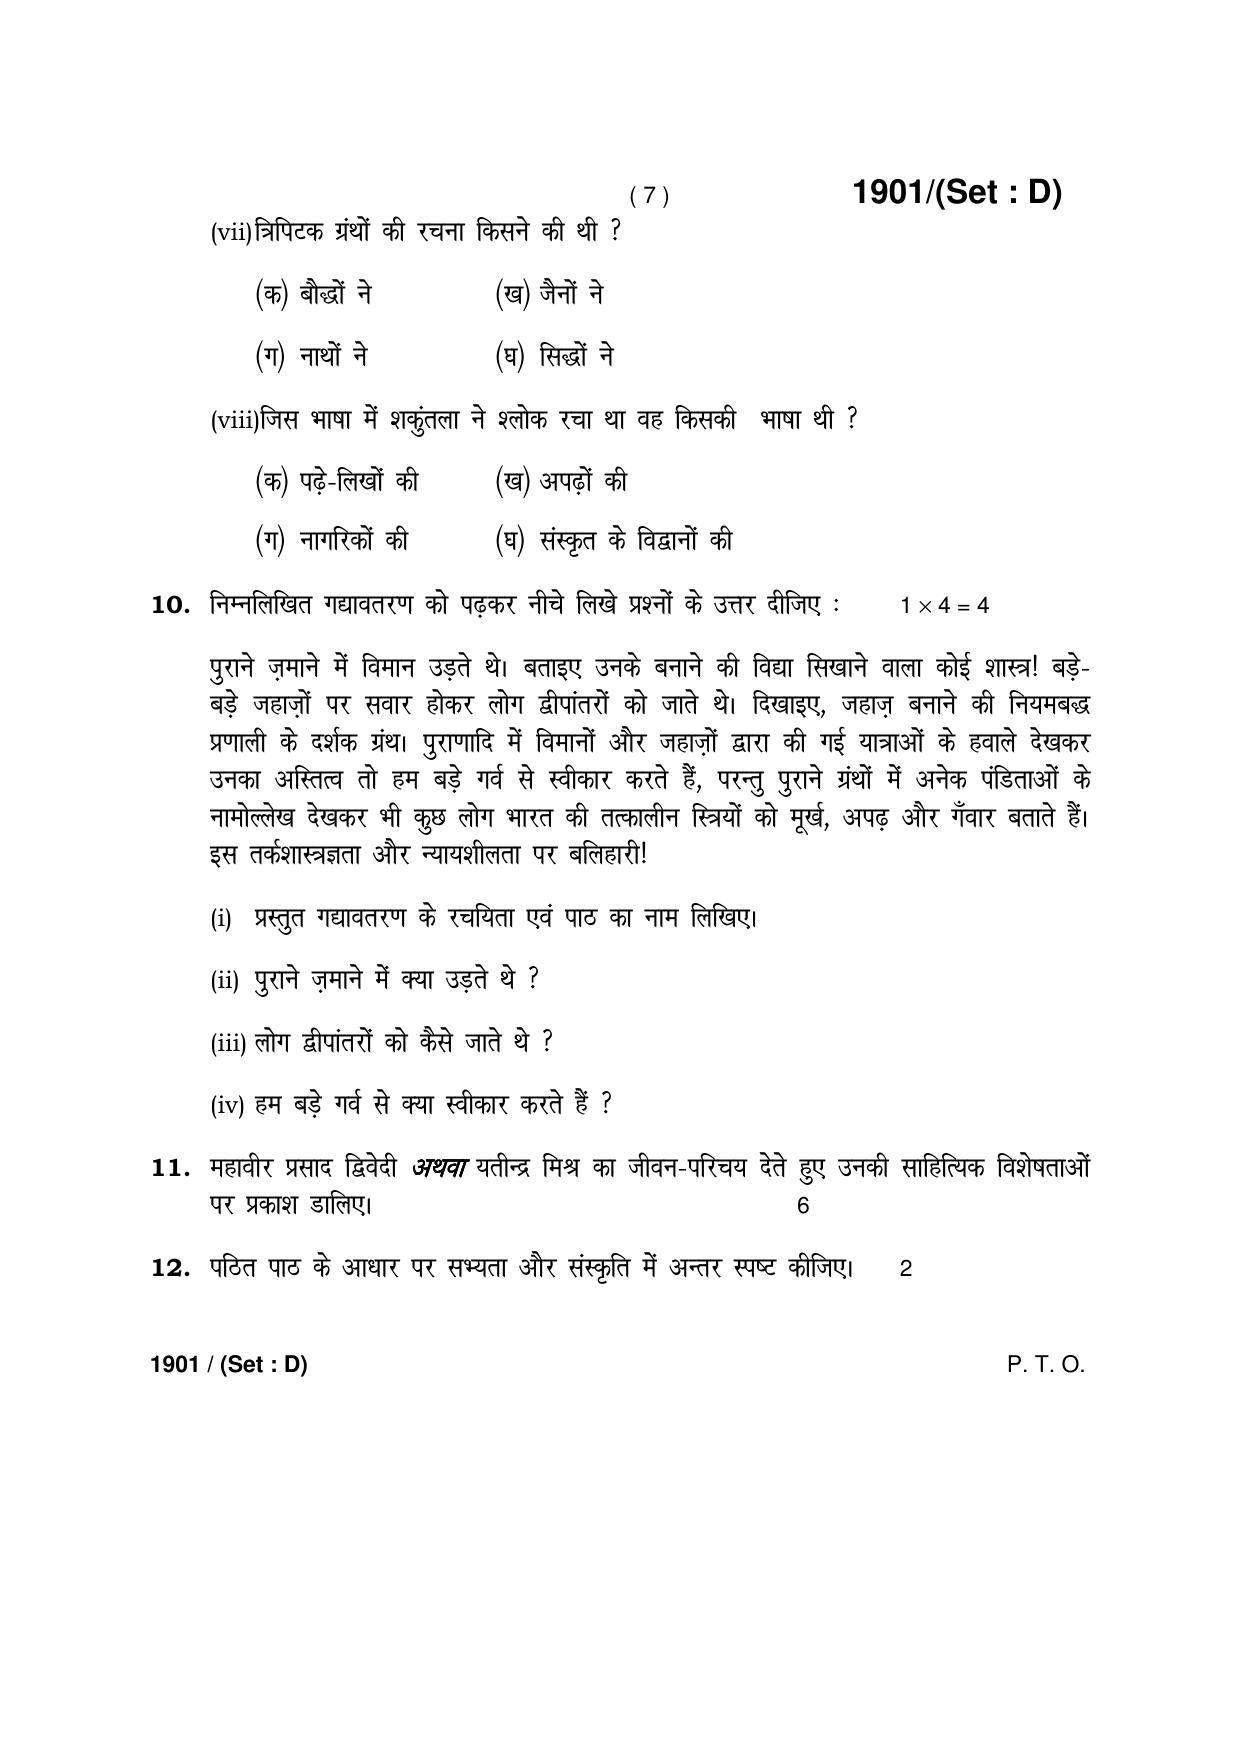 Haryana Board HBSE Class 10 Hindi -D 2017 Question Paper - Page 7